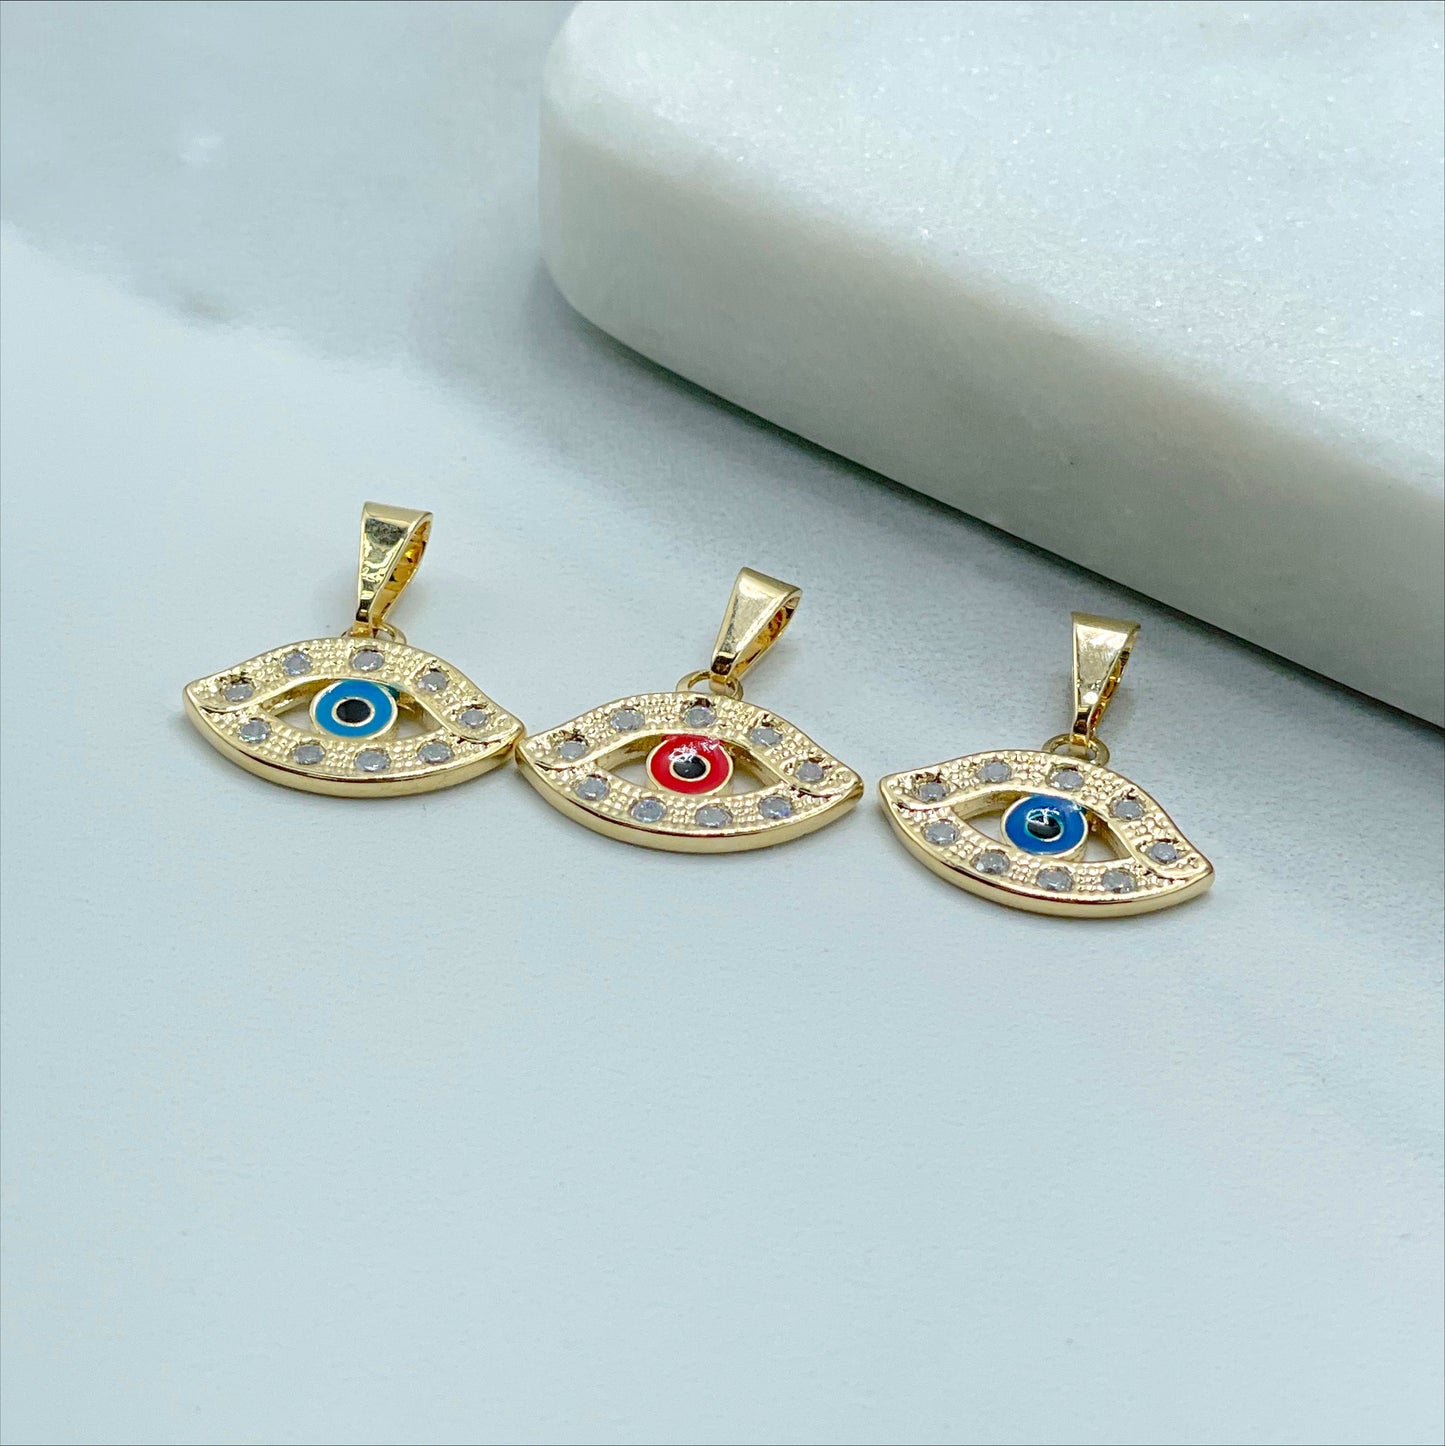 18k Gold Filled Shape Eye with Clear Cubic Zirconia Red, Dark Blue or Blue Evil Eye Charms Pendant, Wholesale Jewelry Making Supplies